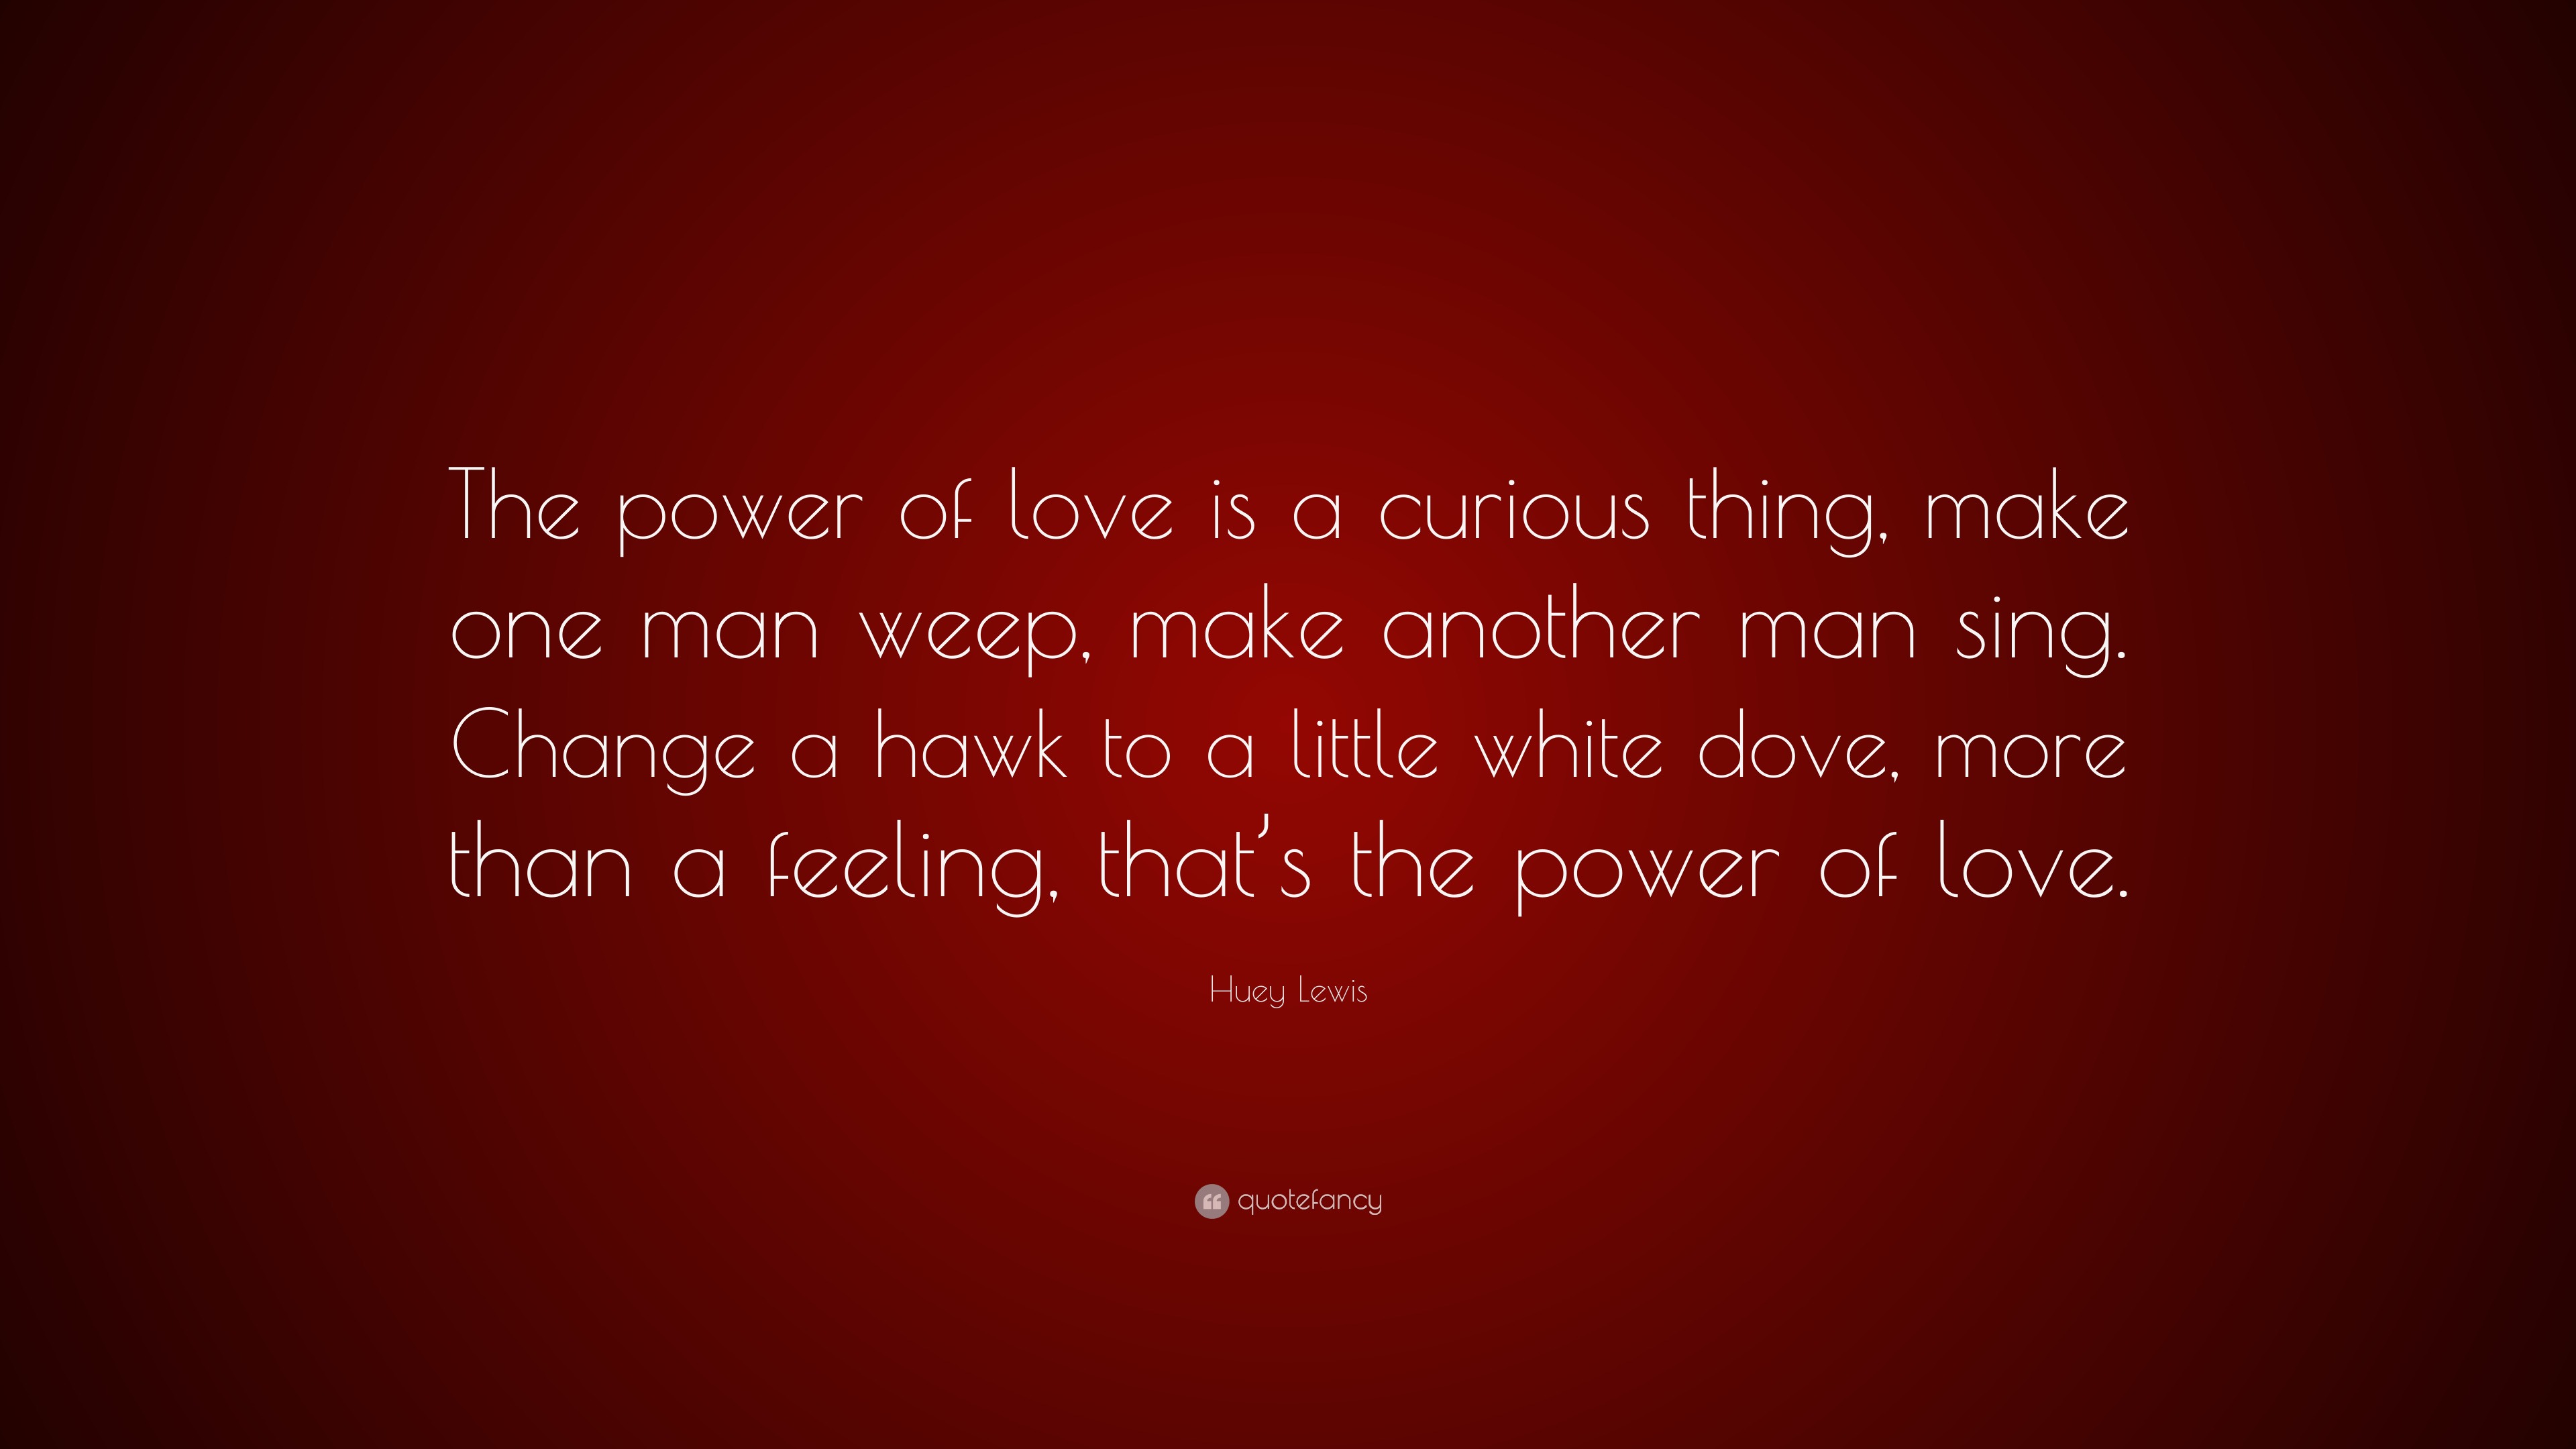 Huey Lewis Quote: “The power of love is a curious thing, make one man ...